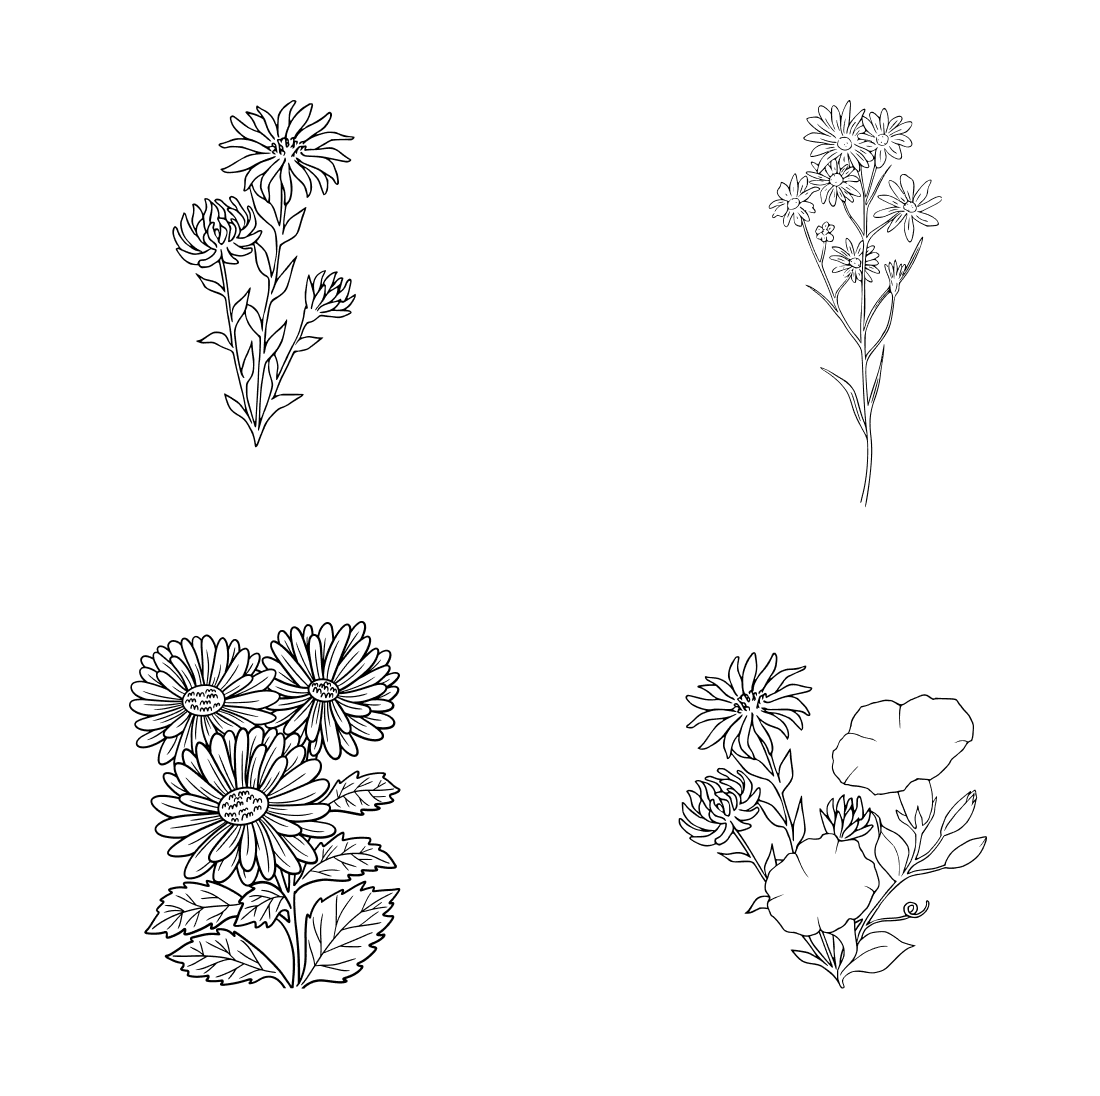 Images with aster flower bundle.